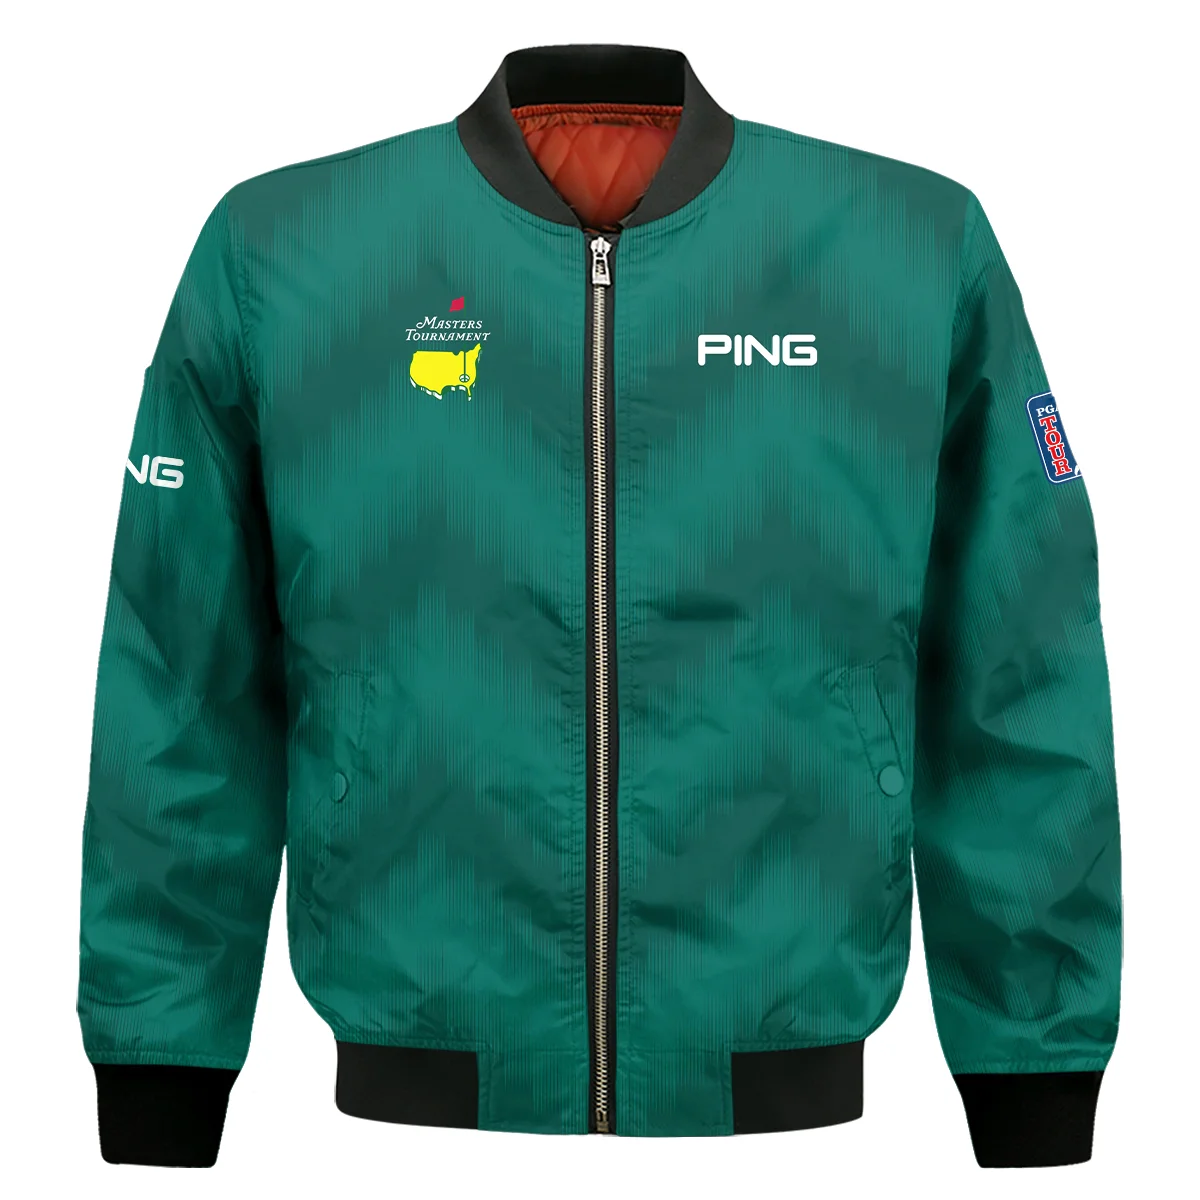 Golf Sport Green Gradient Stripes Pattern Ping Masters Tournament Bomber Jacket Style Classic Bomber Jacket